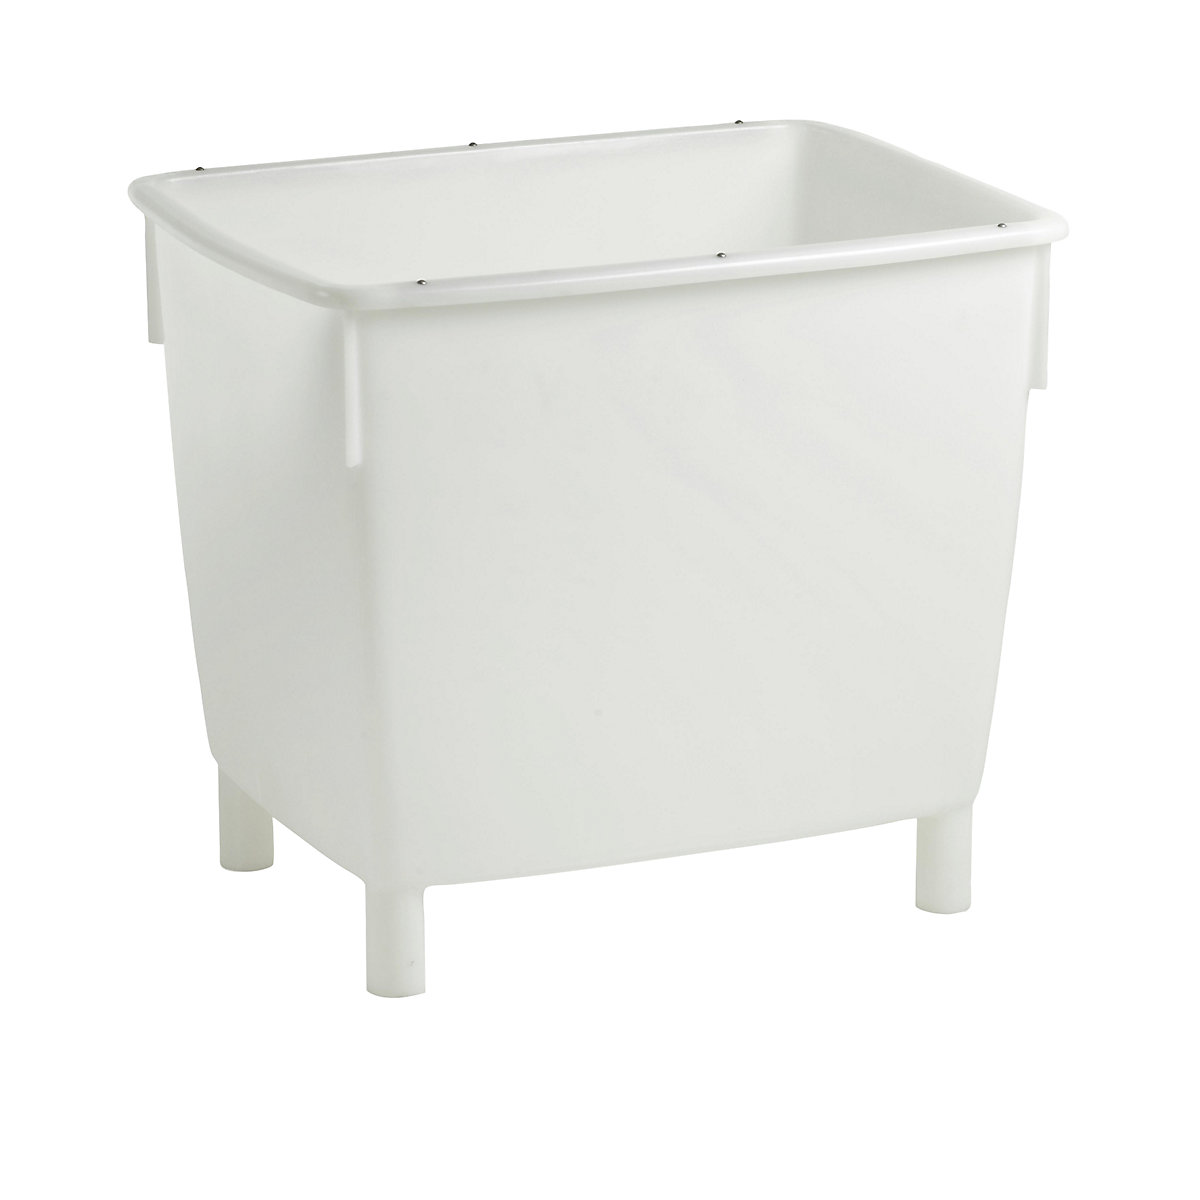 Rectangular container, with feet, suitable for foodstuffs, white, capacity 400 l-5